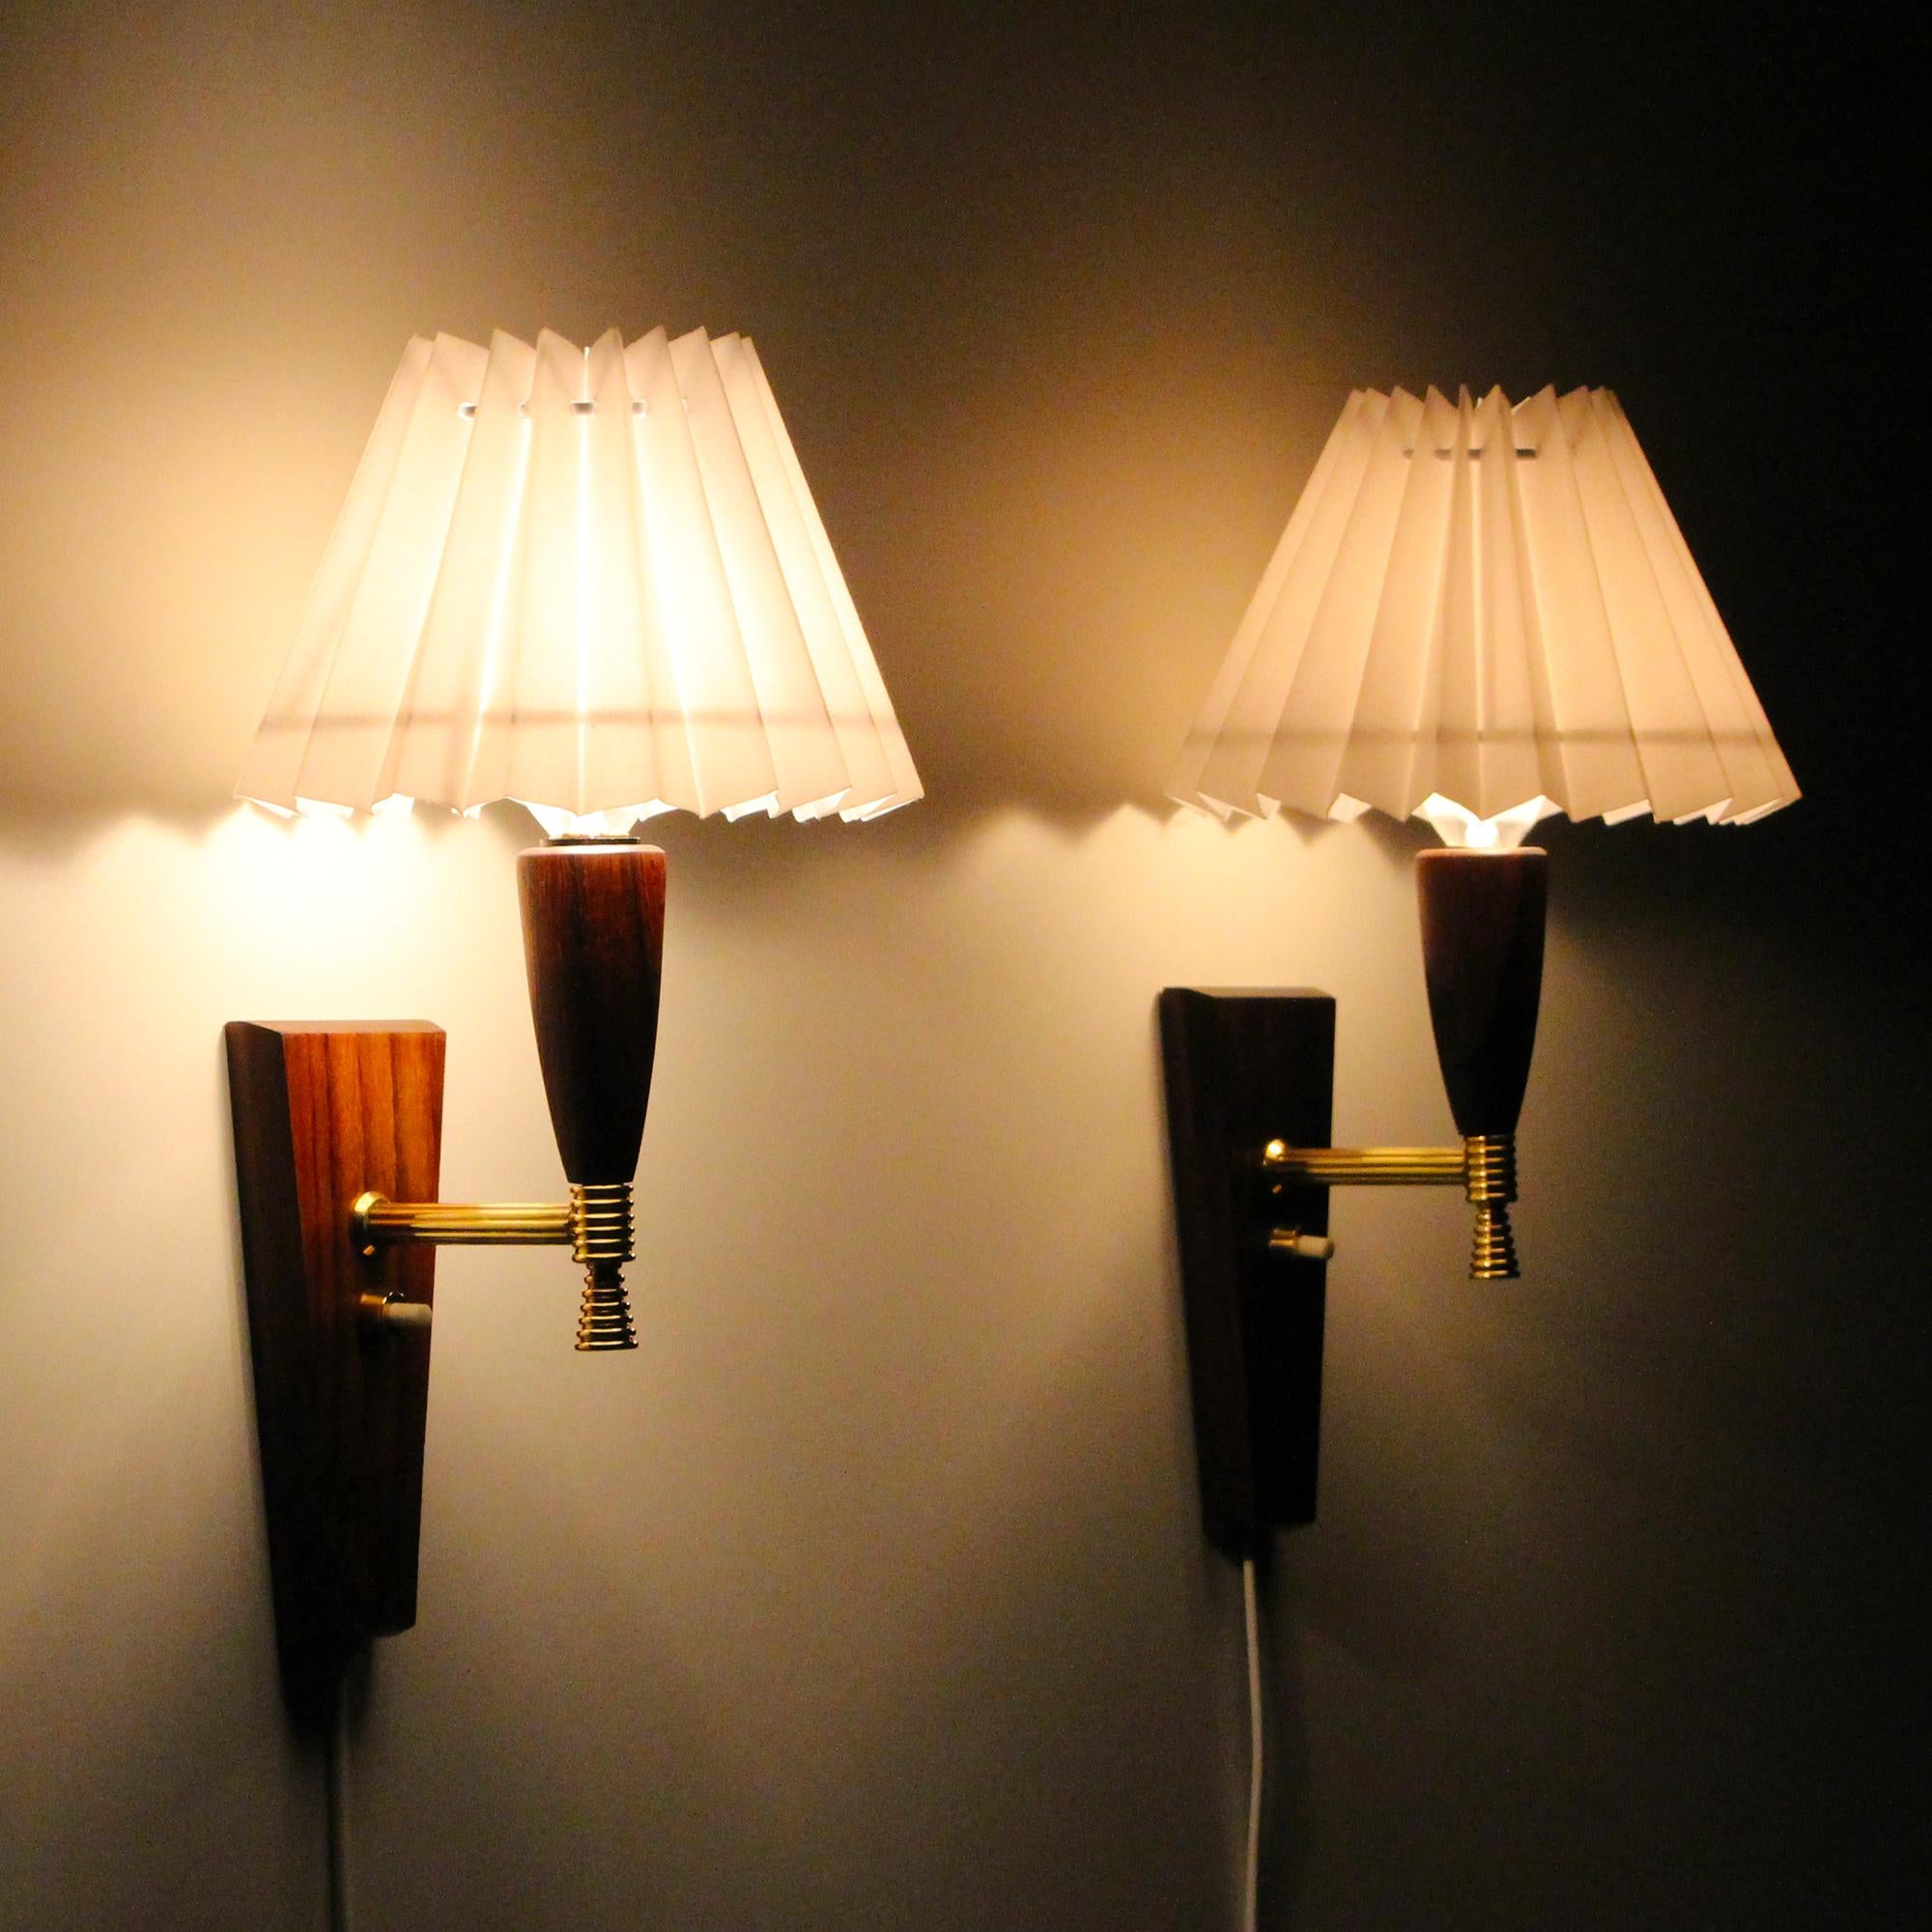 Teak wall lights, pair of 1960s Danish wall lamps with new white pleated shades by Laoni Belysning, in very good vintage condition.

A charming pair of midcentury sconces with trapezoid shaped teak bases, polished brass arms and cone shaped teak